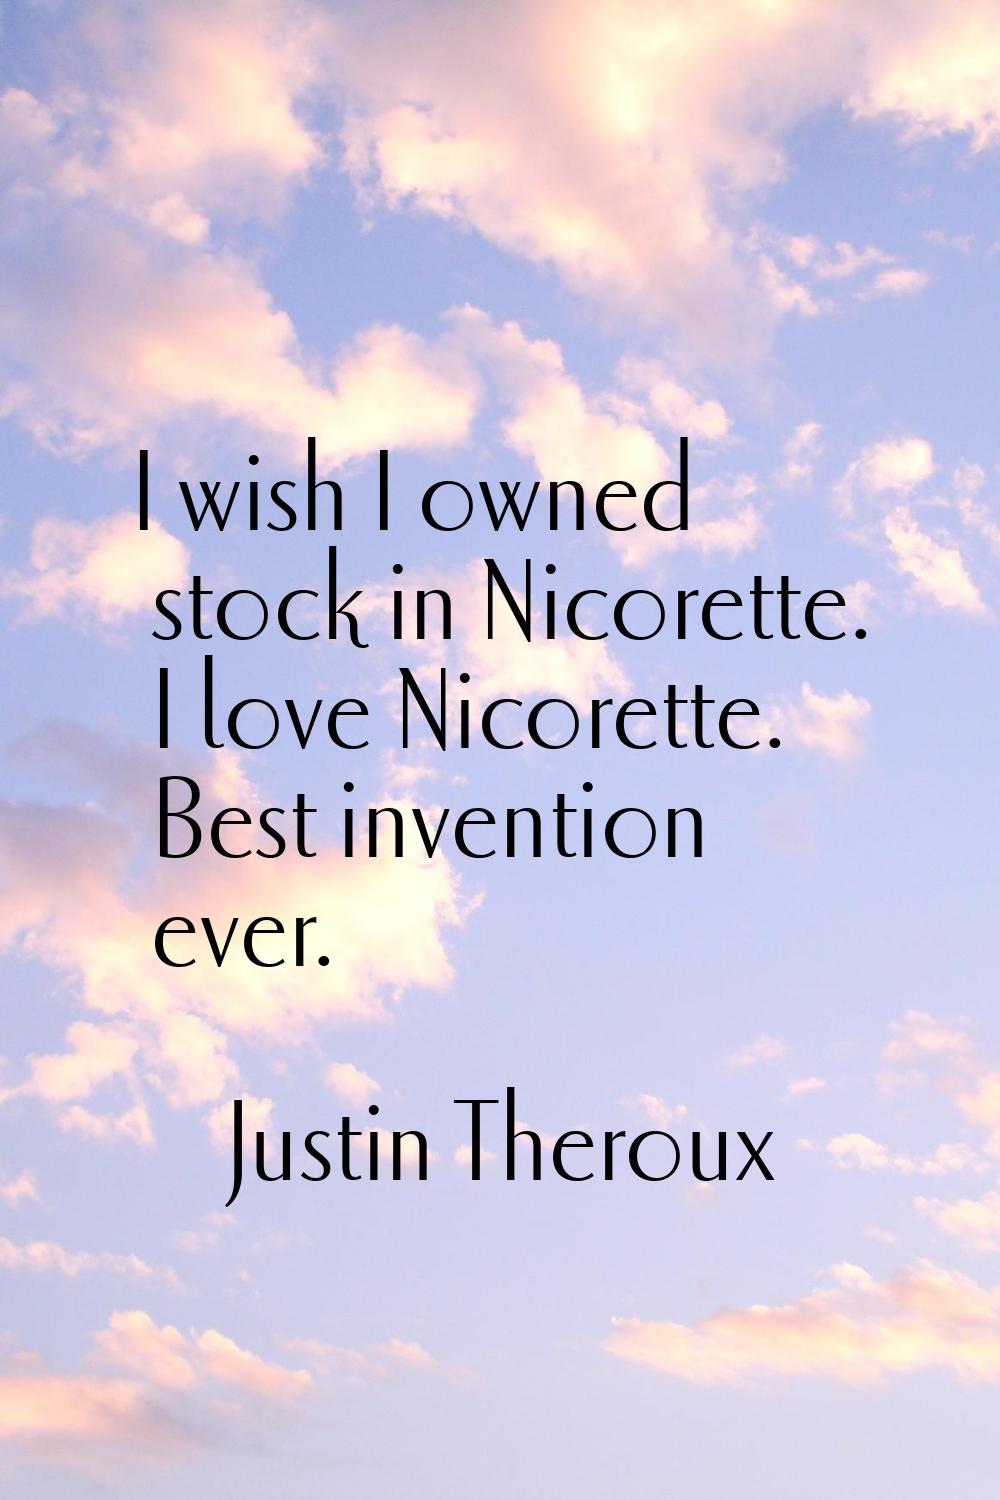 I wish I owned stock in Nicorette. I love Nicorette. Best invention ever.